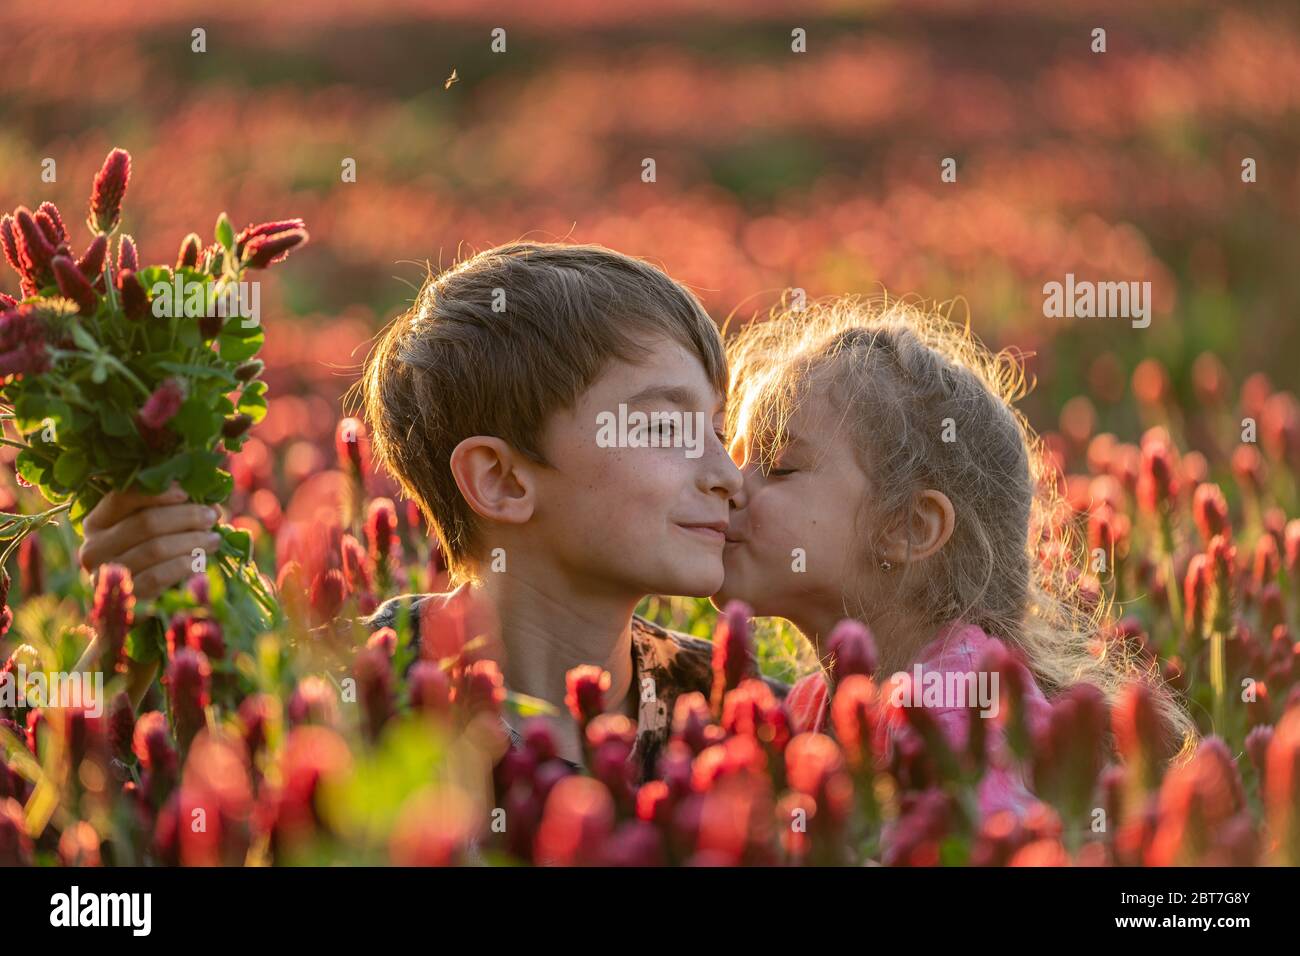 Small girl kissing boy to his face in the field. Golden light. Adorable kids Stock Photo